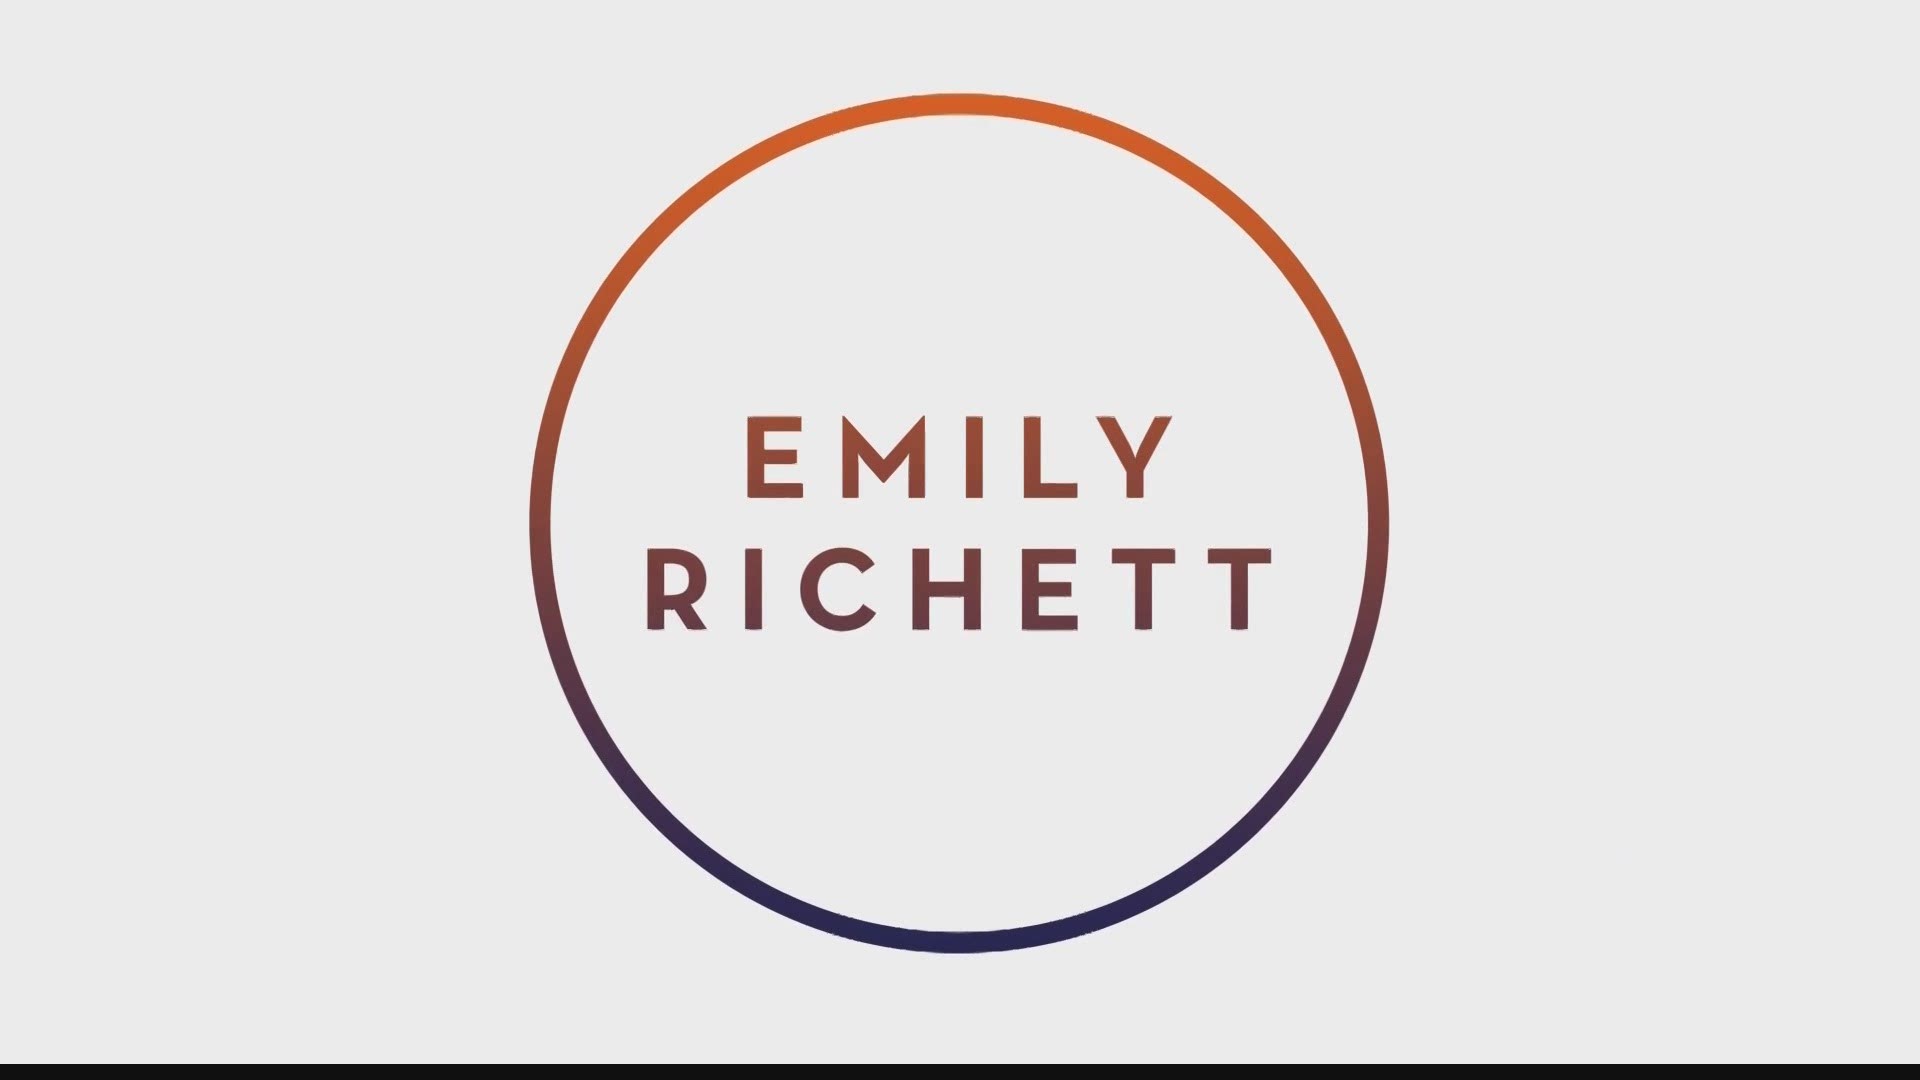 Millennial mom Emily Richett challenges you to make habits, not resolutions.